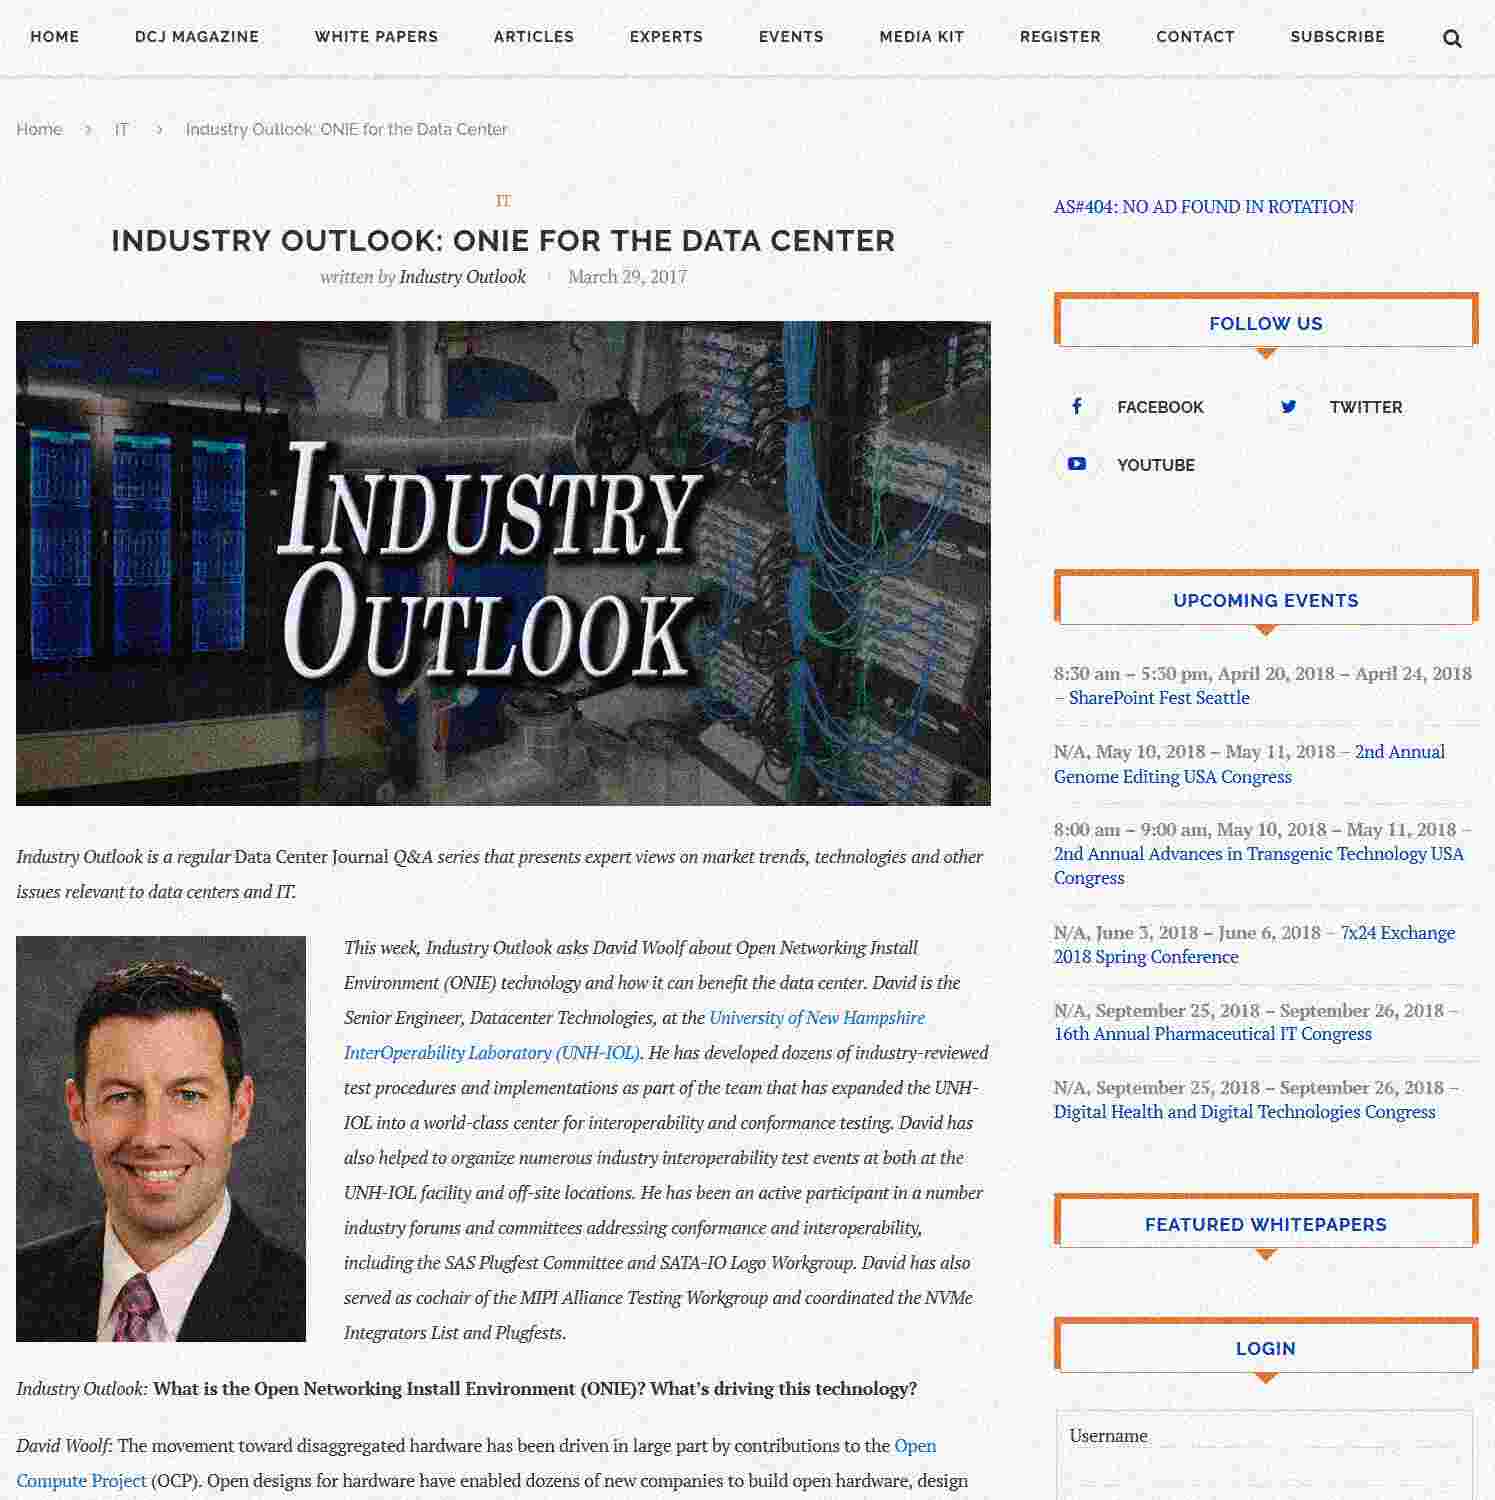 Illustration of Industry Outlook: ONIE for the Data Center